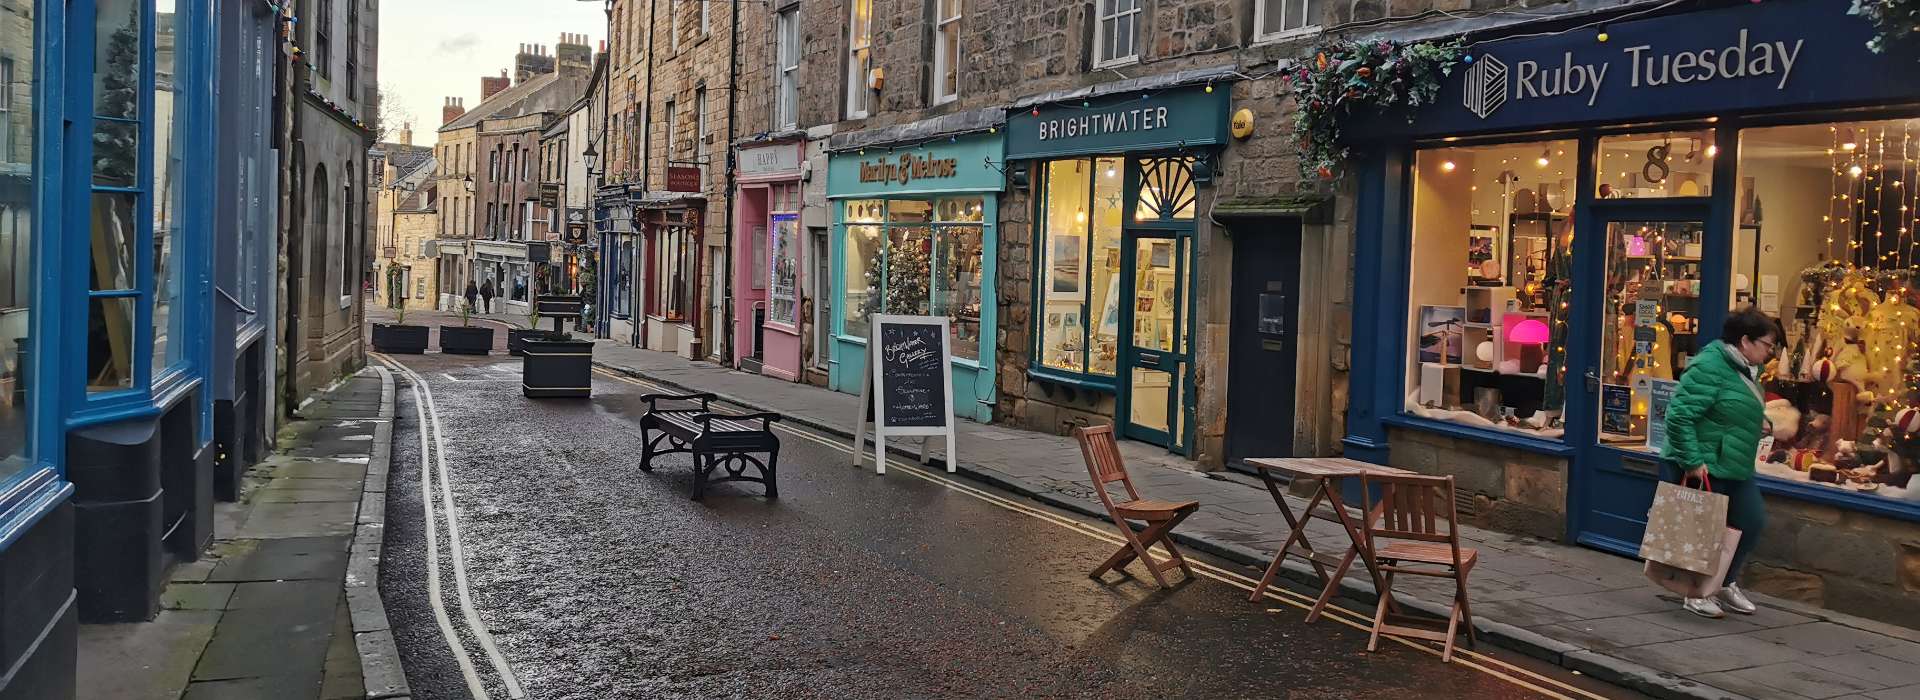 'Step into Alnwick' with the new Alnwick town centre app this winter